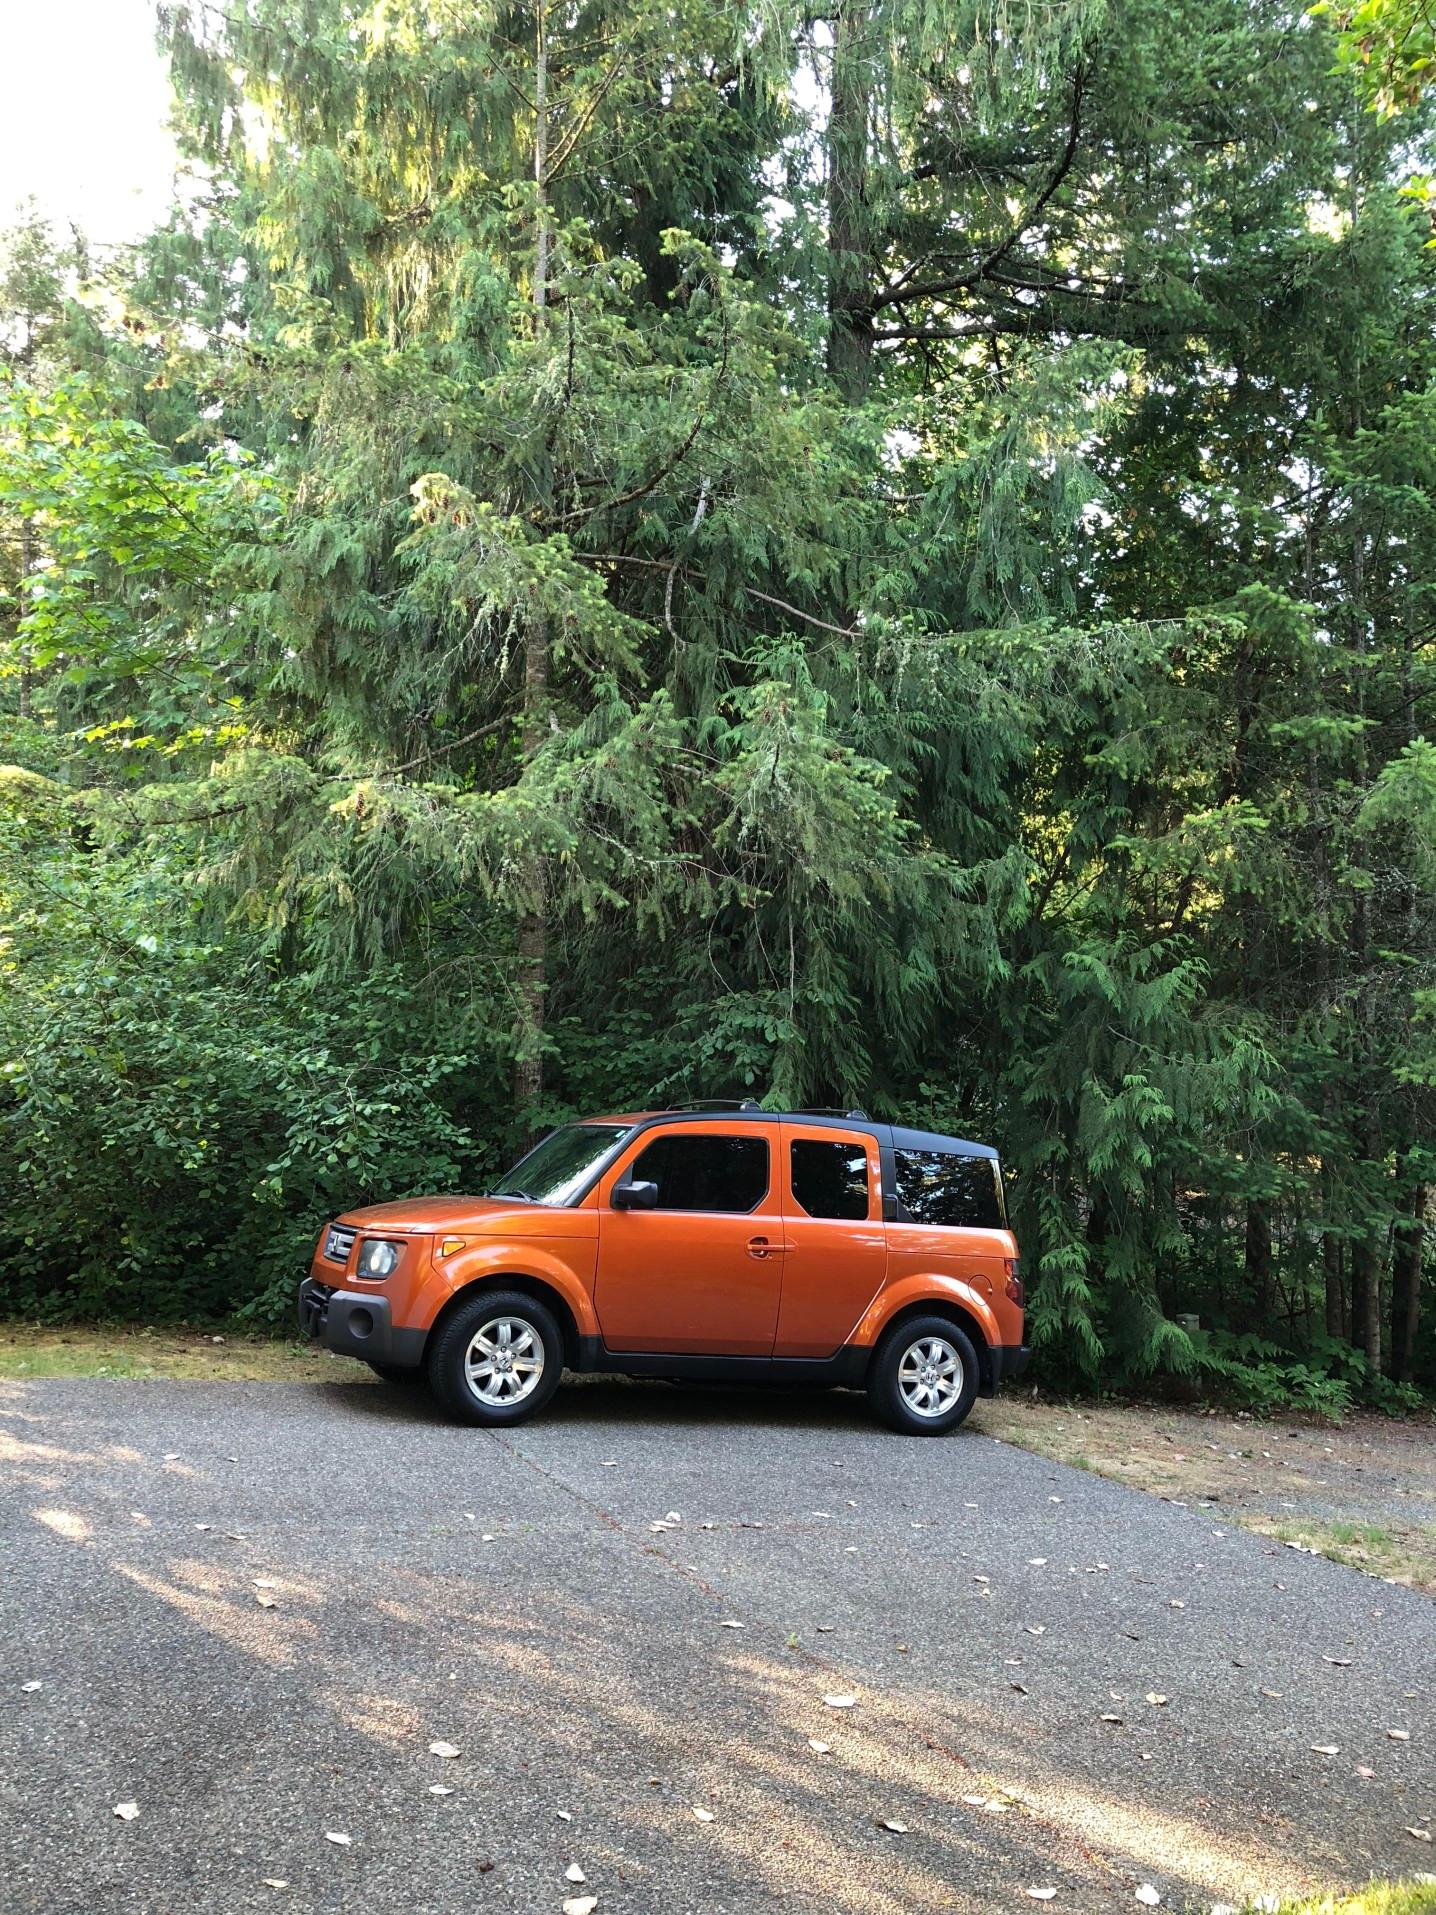 Will the Honda Element be considered a classic one day?